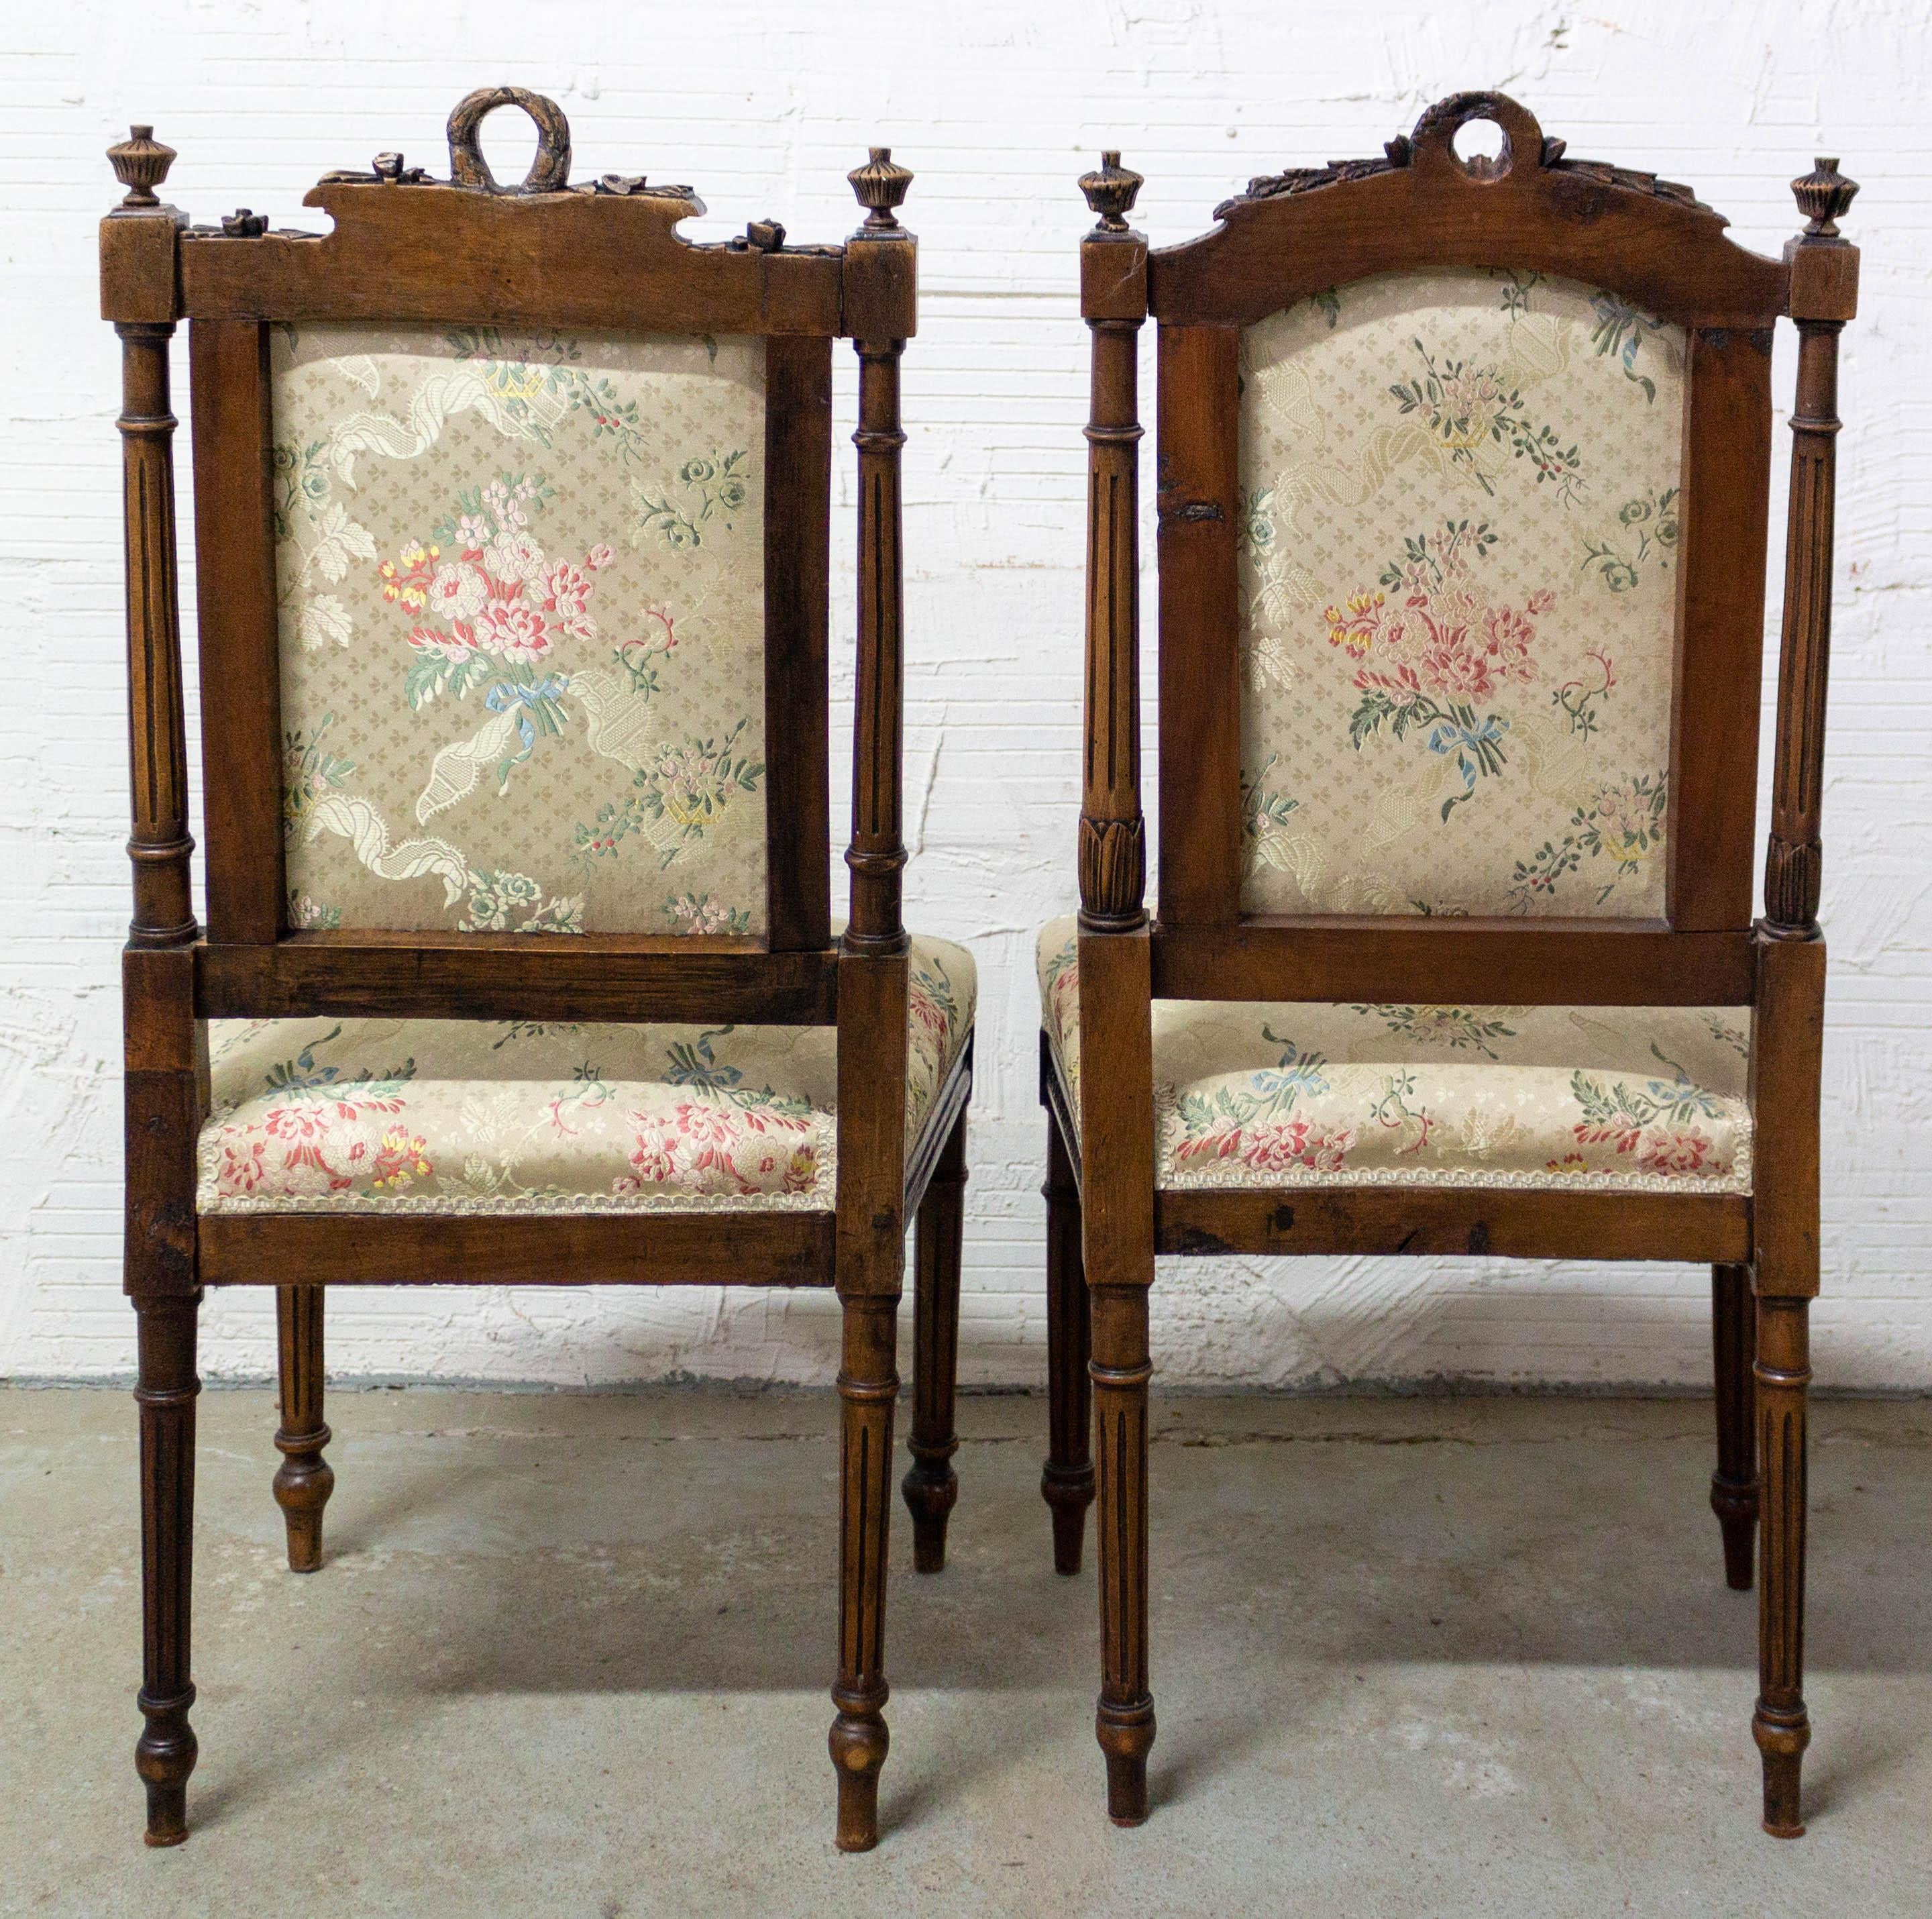 Upholstery Pair of Napoleon III Oak Chairs Upholstered French, Late 19th Century